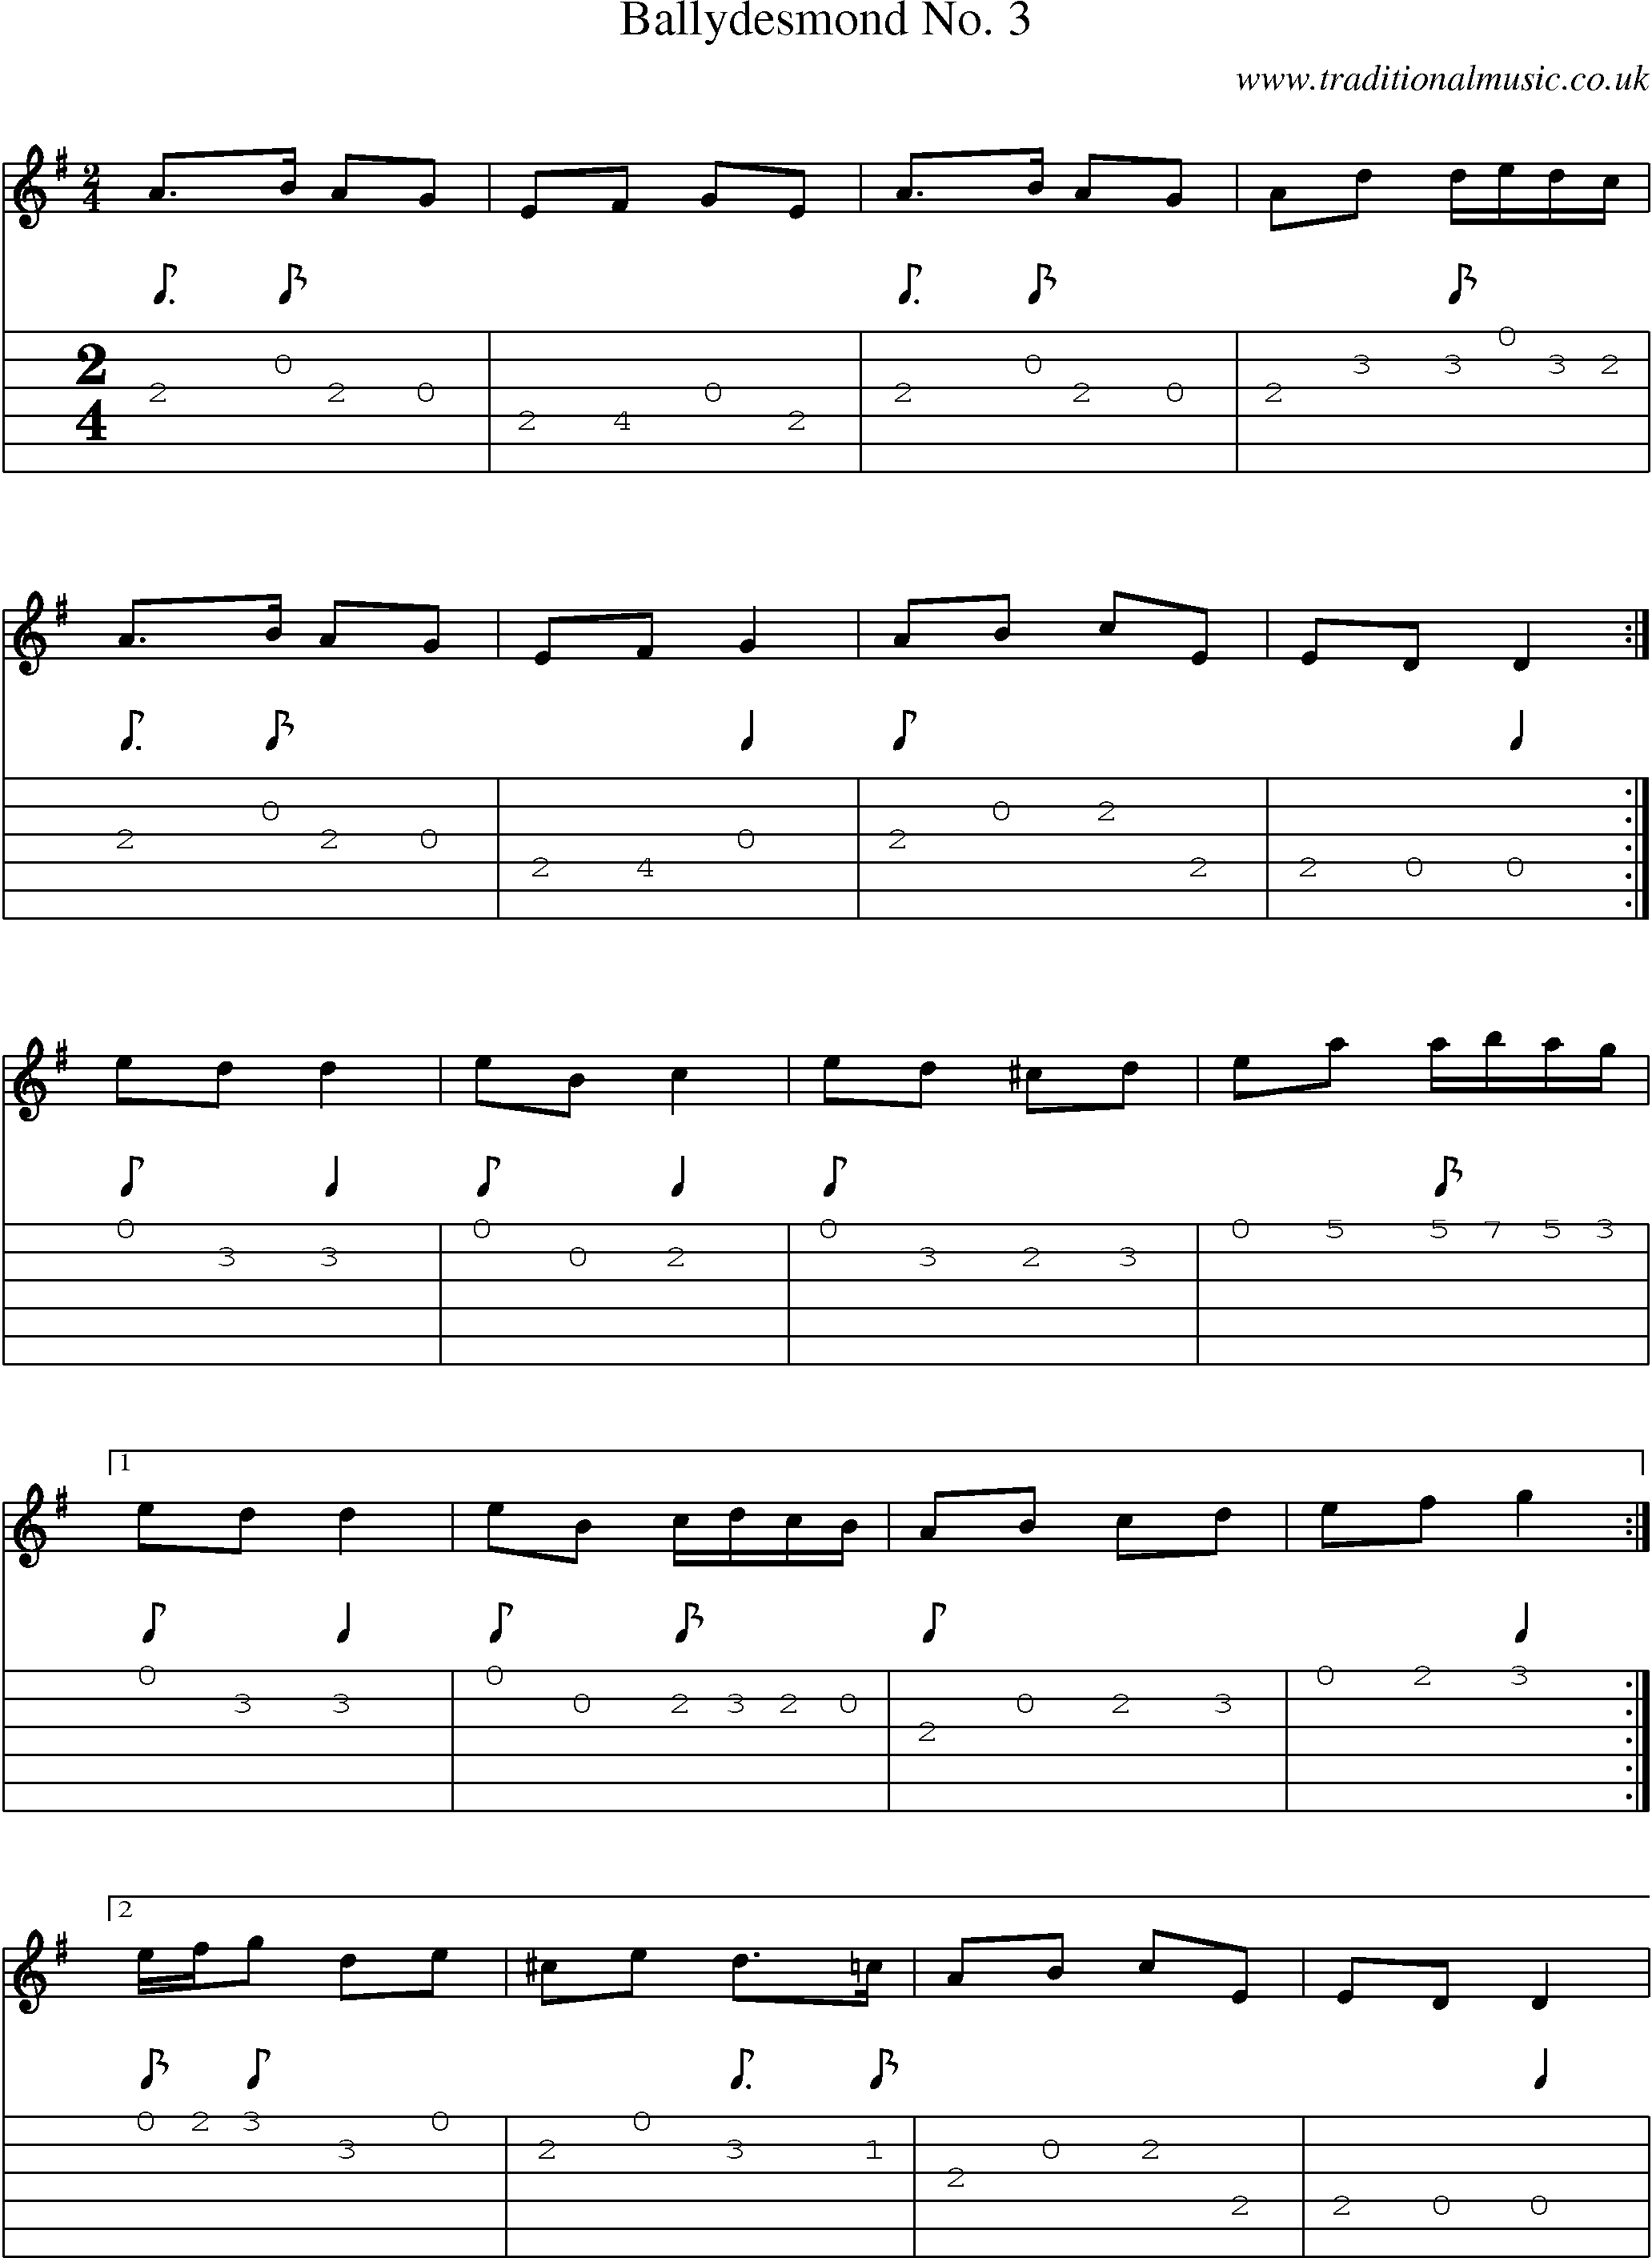 Music Score and Guitar Tabs for Ballydesmond No 3